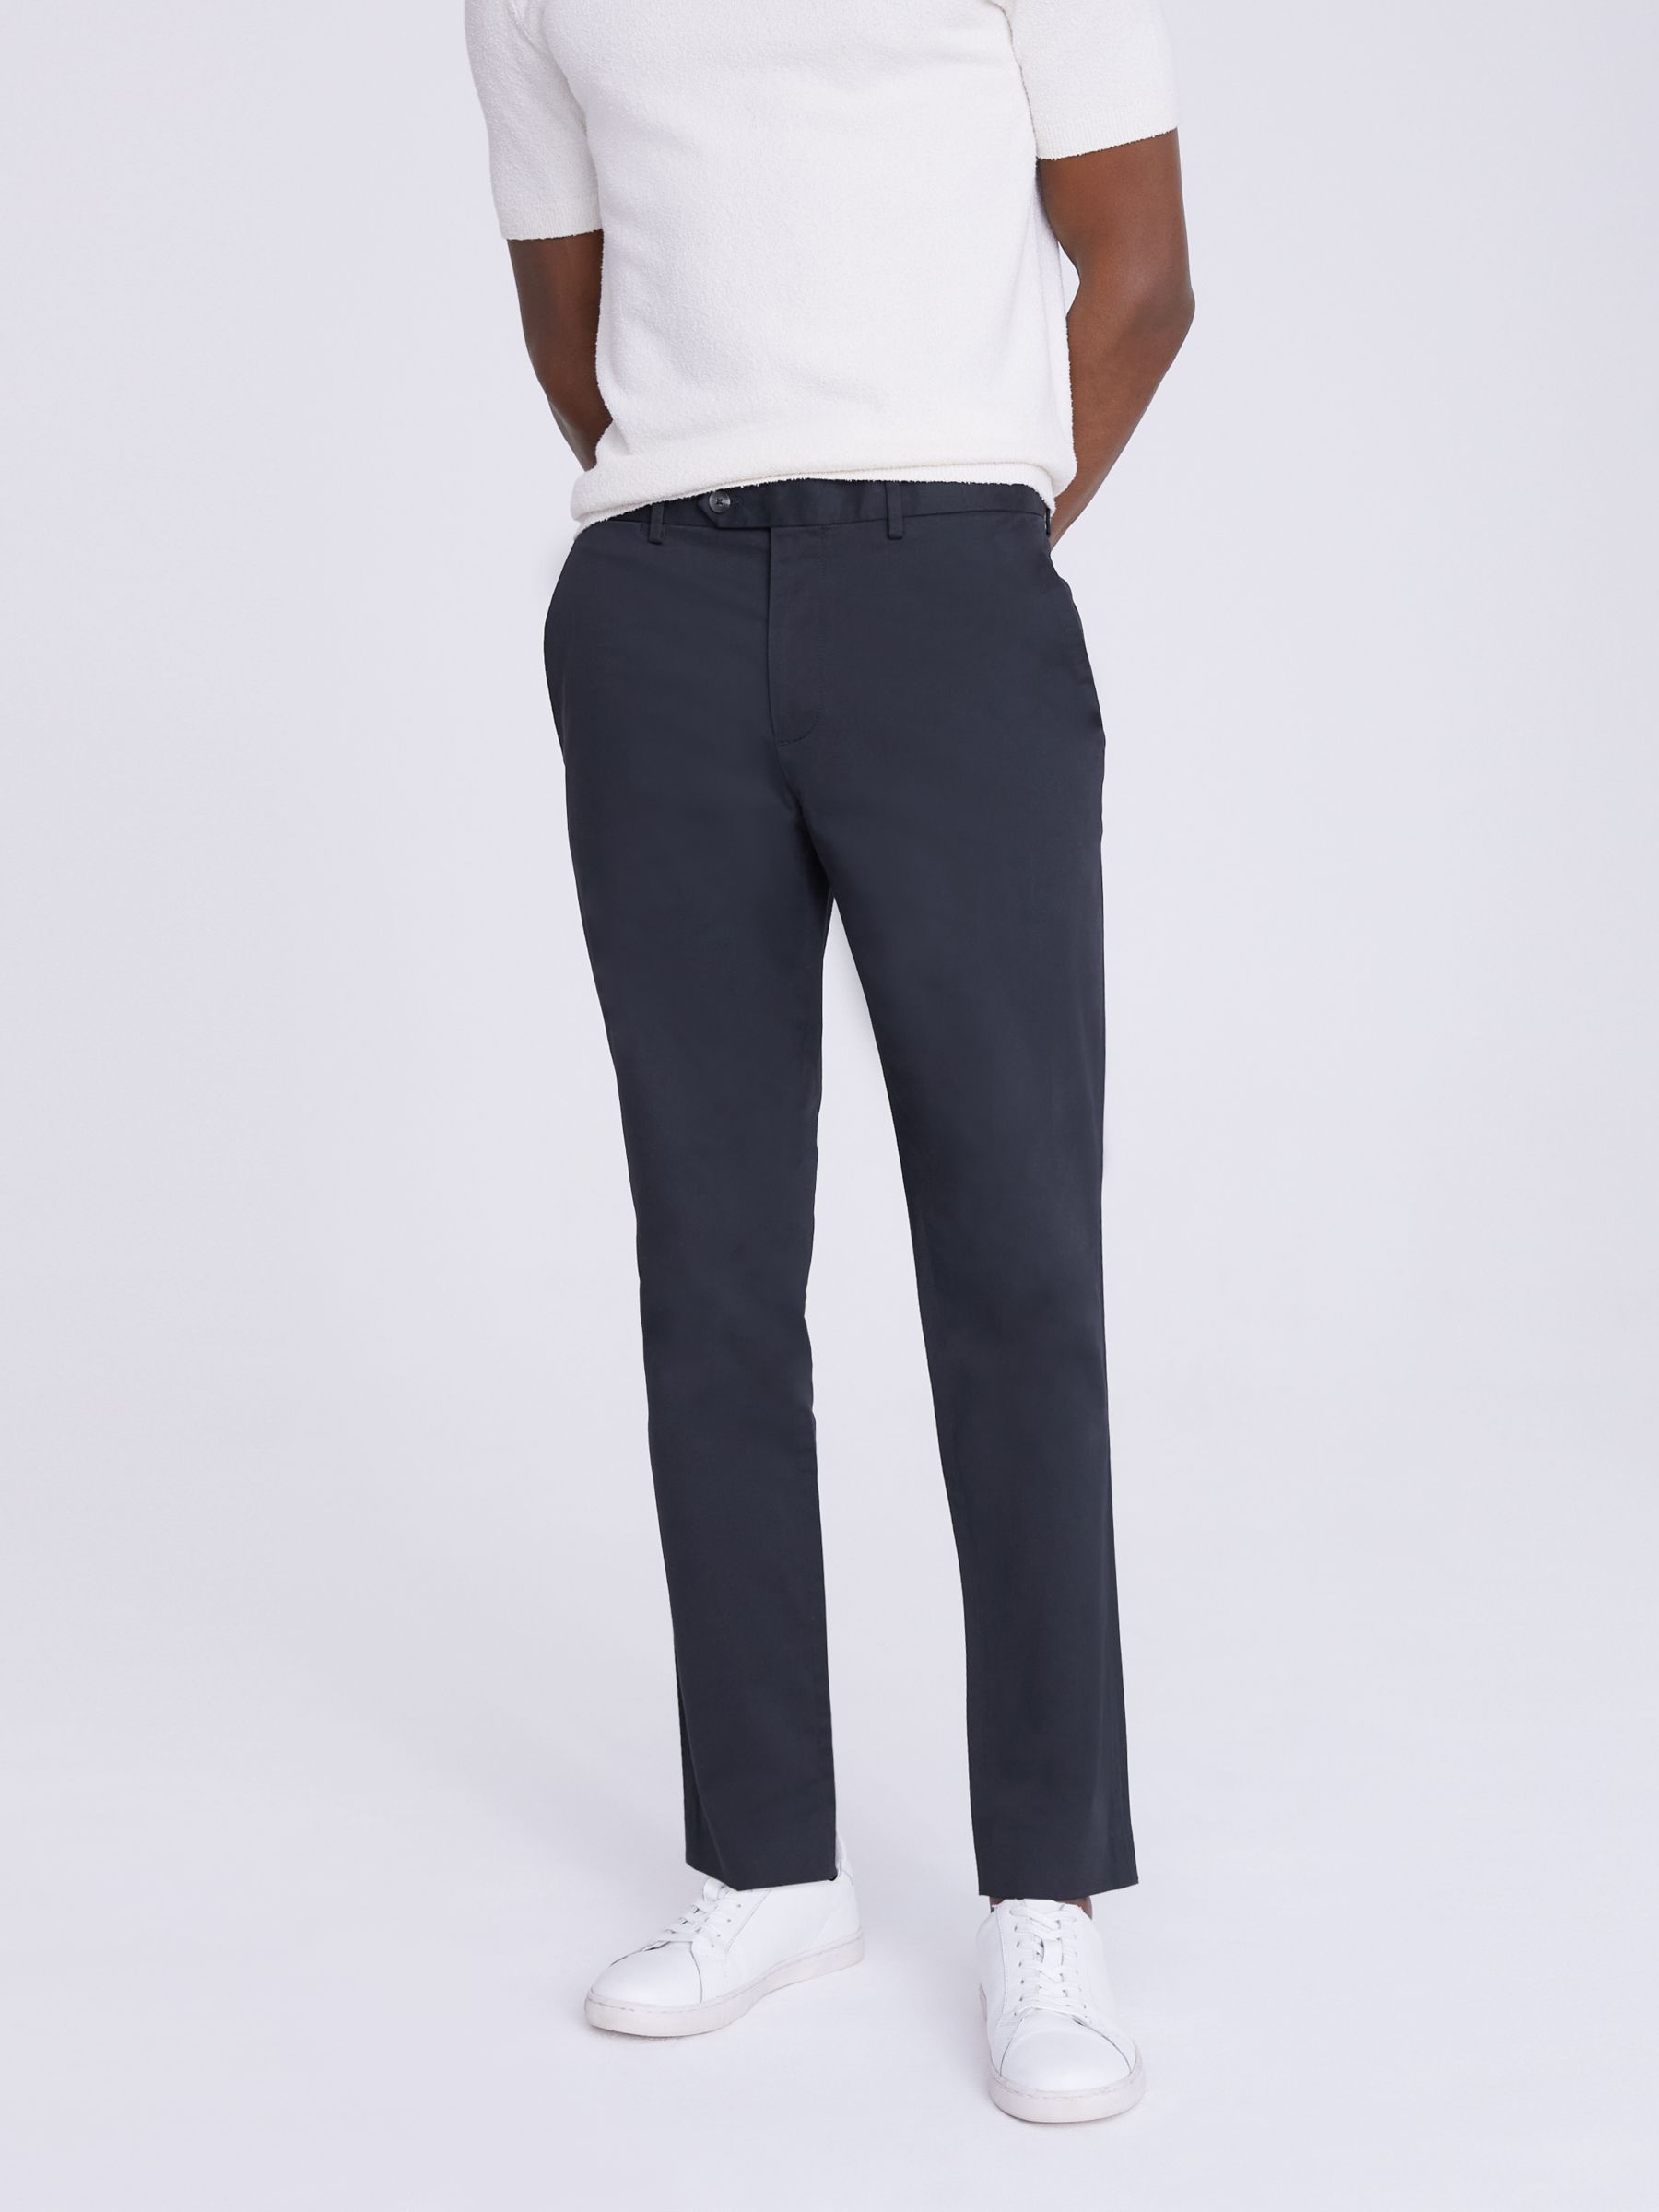 Moss Slim Fit Chinos, Navy at John Lewis & Partners